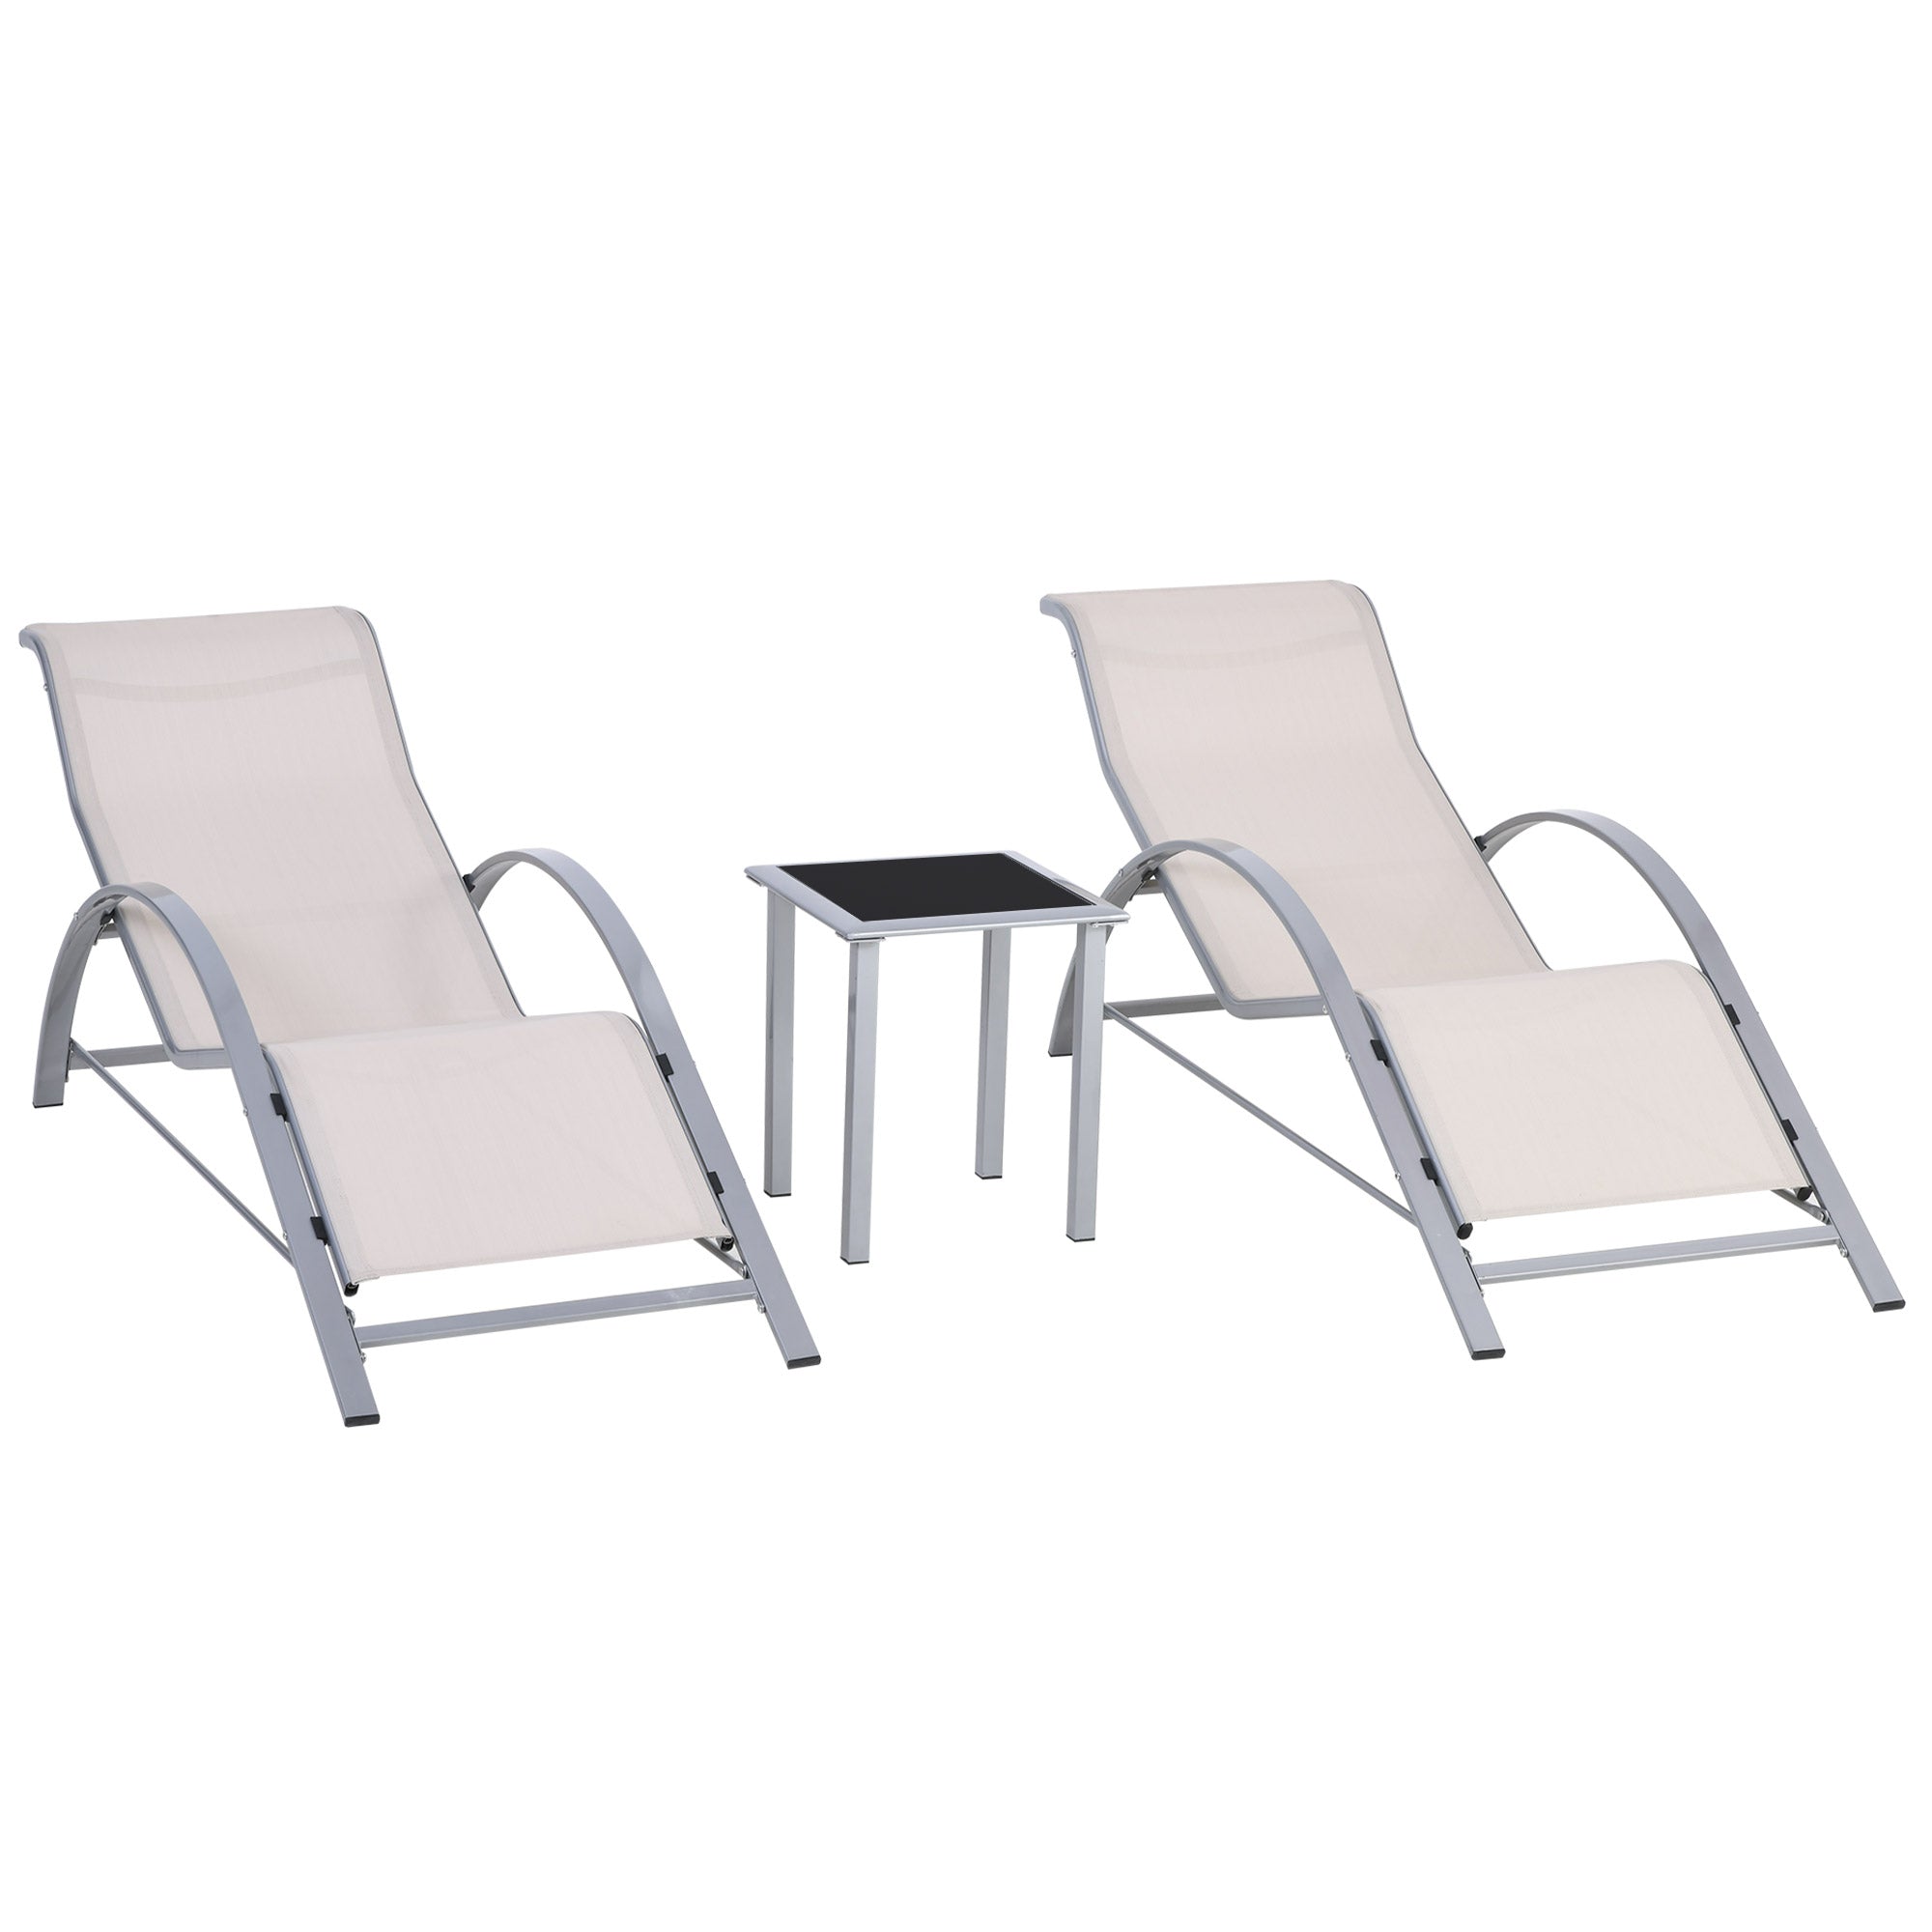 Outsunny 3 Pieces Lounge Chair Set Garden Sunbathing Chair w/ Table Cream  | TJ Hughes